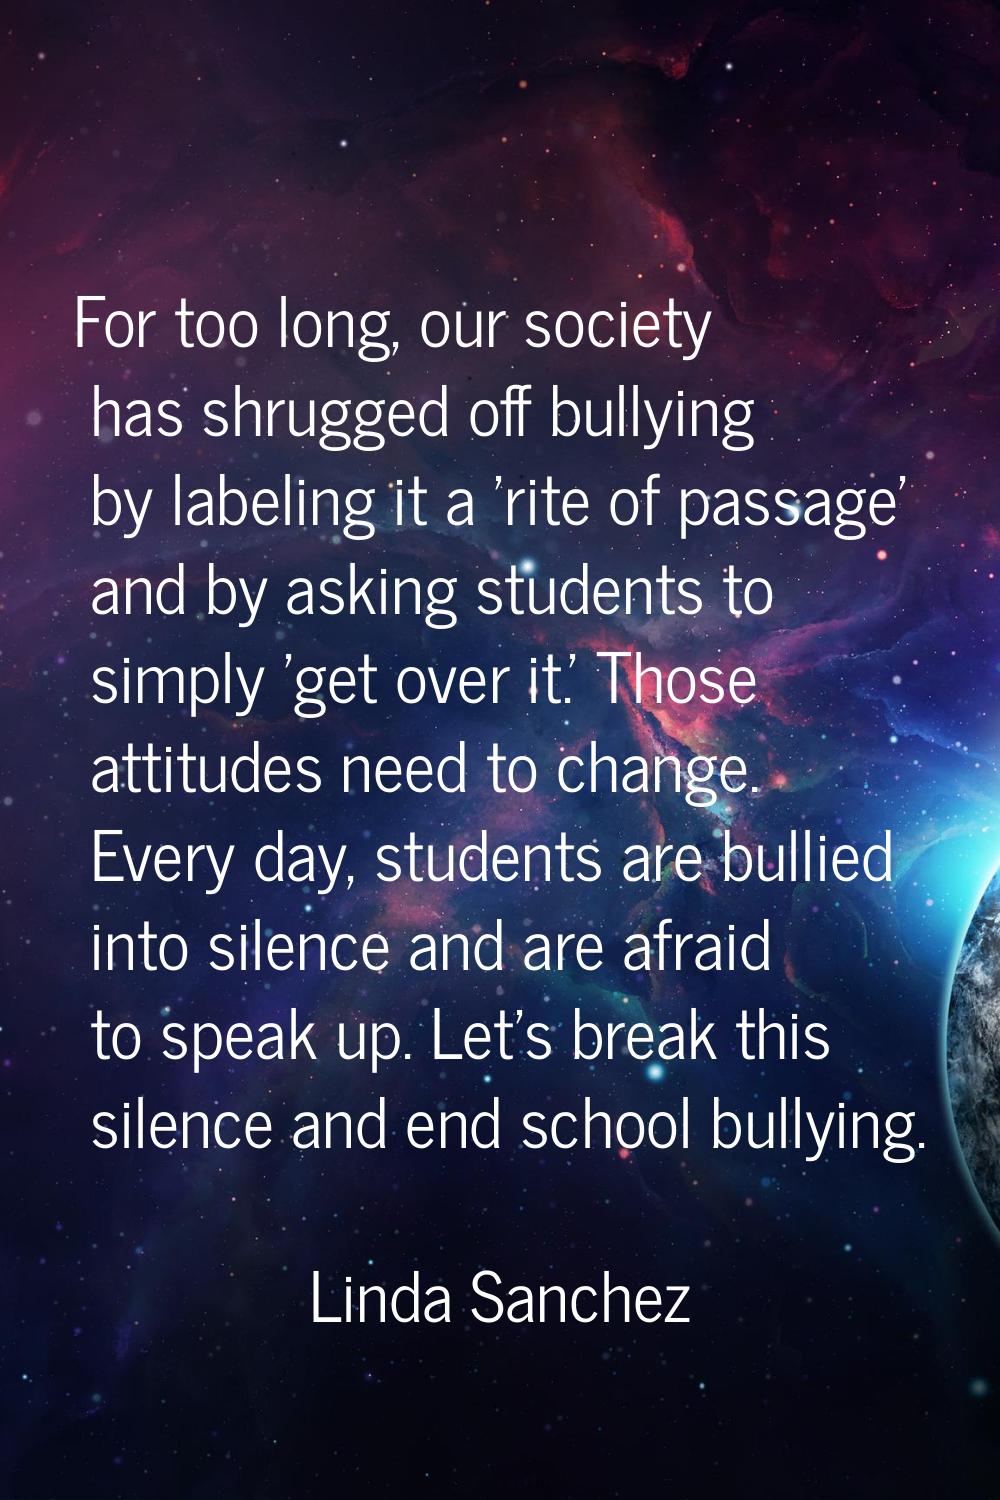 For too long, our society has shrugged off bullying by labeling it a 'rite of passage' and by askin